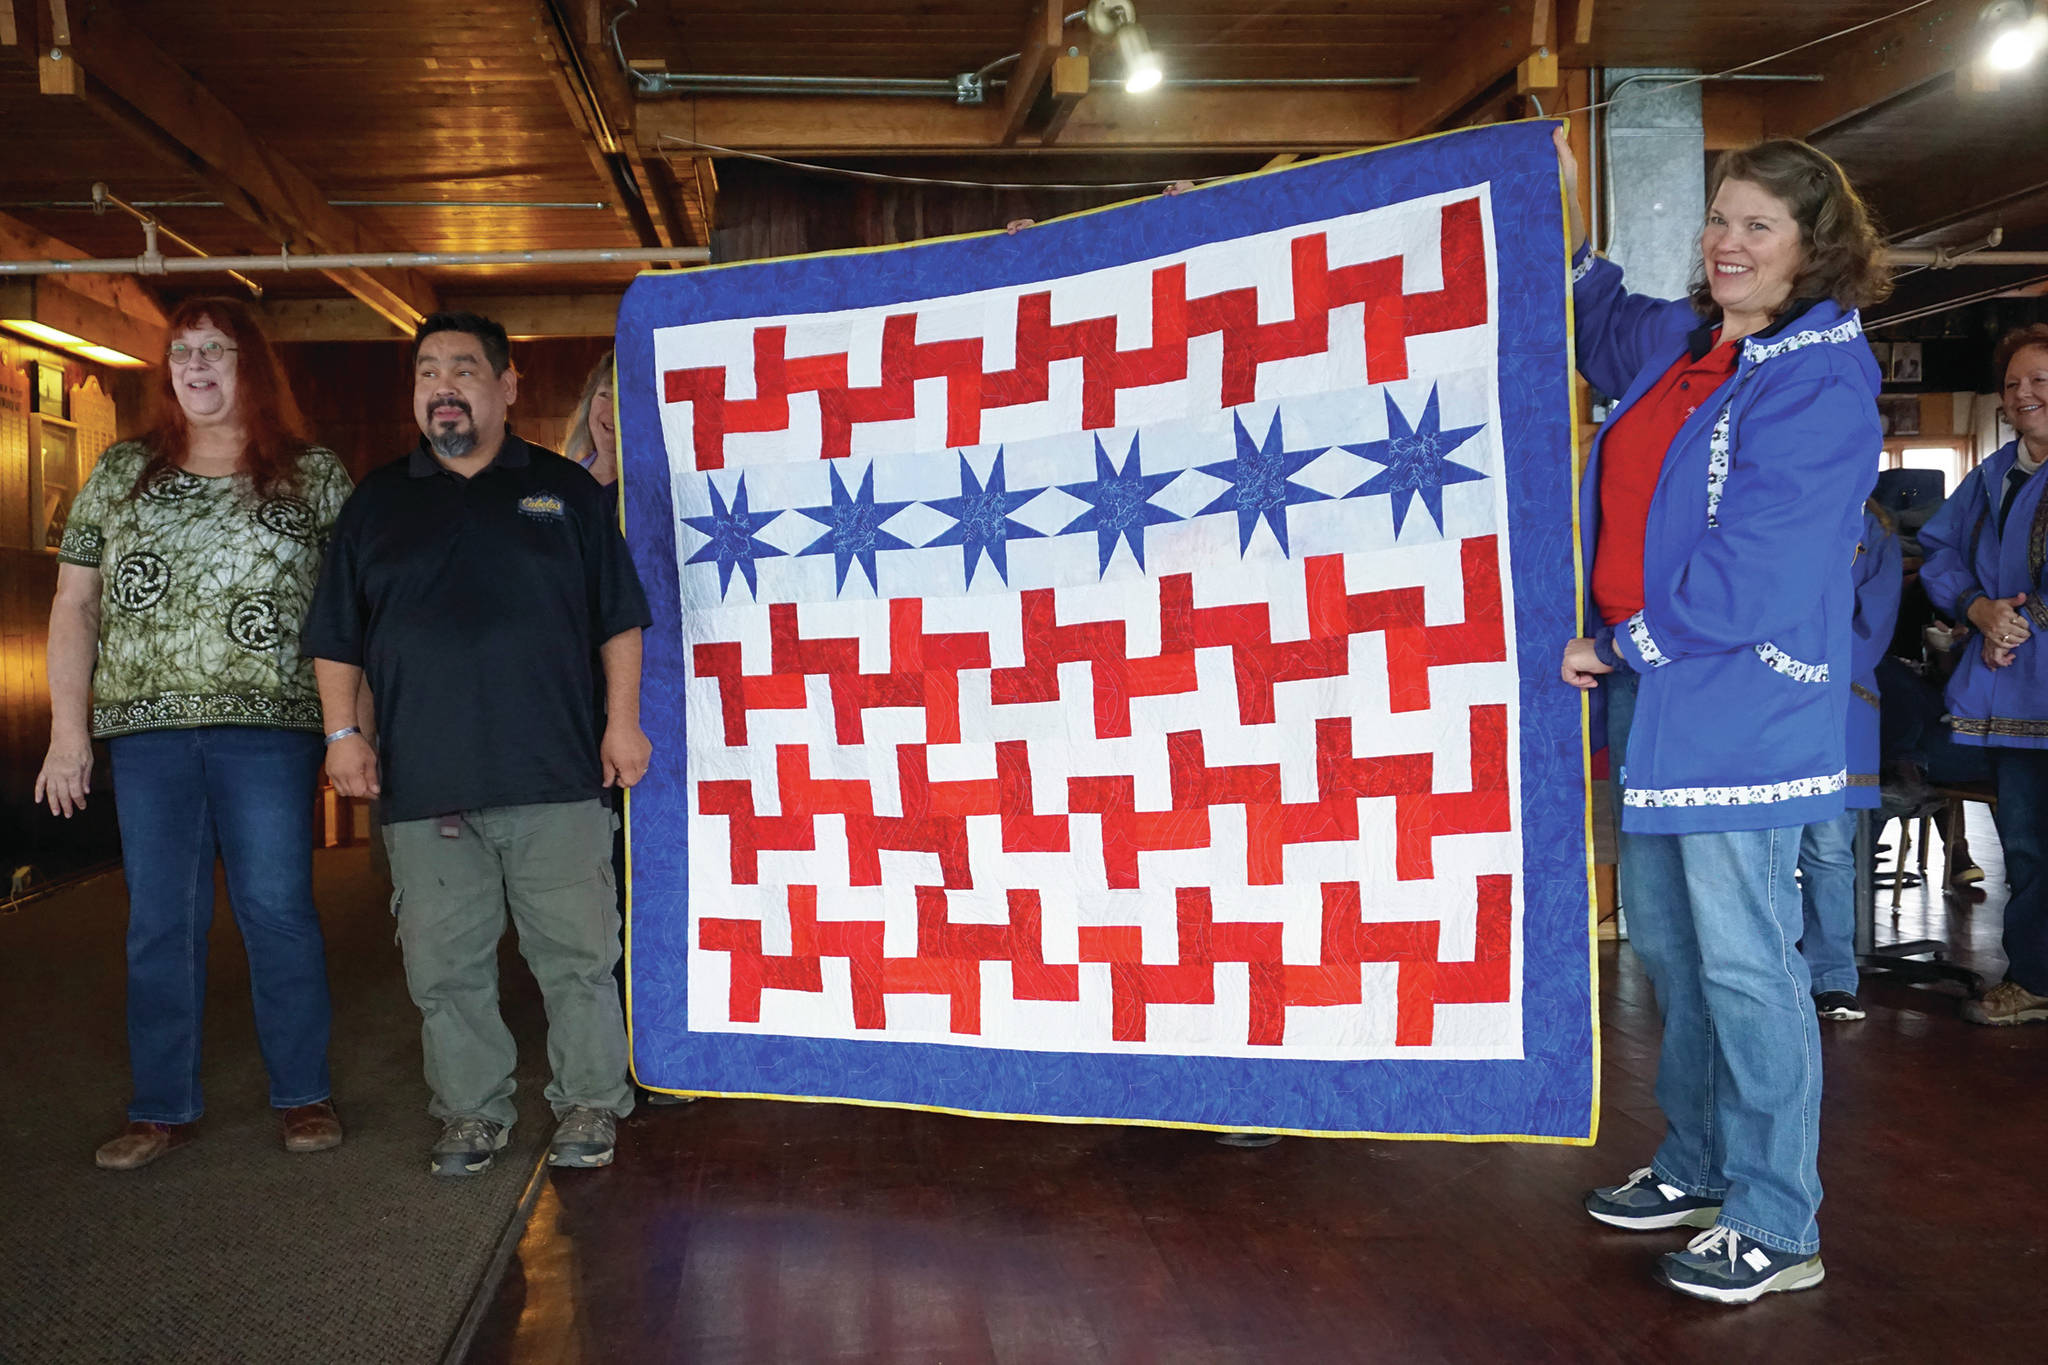 Iraq War veteran Robert “R.J.” Carlough stands with a Quilt of Valor presented to him at the Veterans Day lunch held at the Elks Lodge on Nov. 11, 2019, in Homer, Alaska. Carlough served in the U.S. Army First Division, 16th Infantry — the Big Red One — from 2002-10, and in Iraq from 2003-04. To his right is Karrie Youngblood, who quilted the work. (Photo by Michael Armstrong/Homer News)